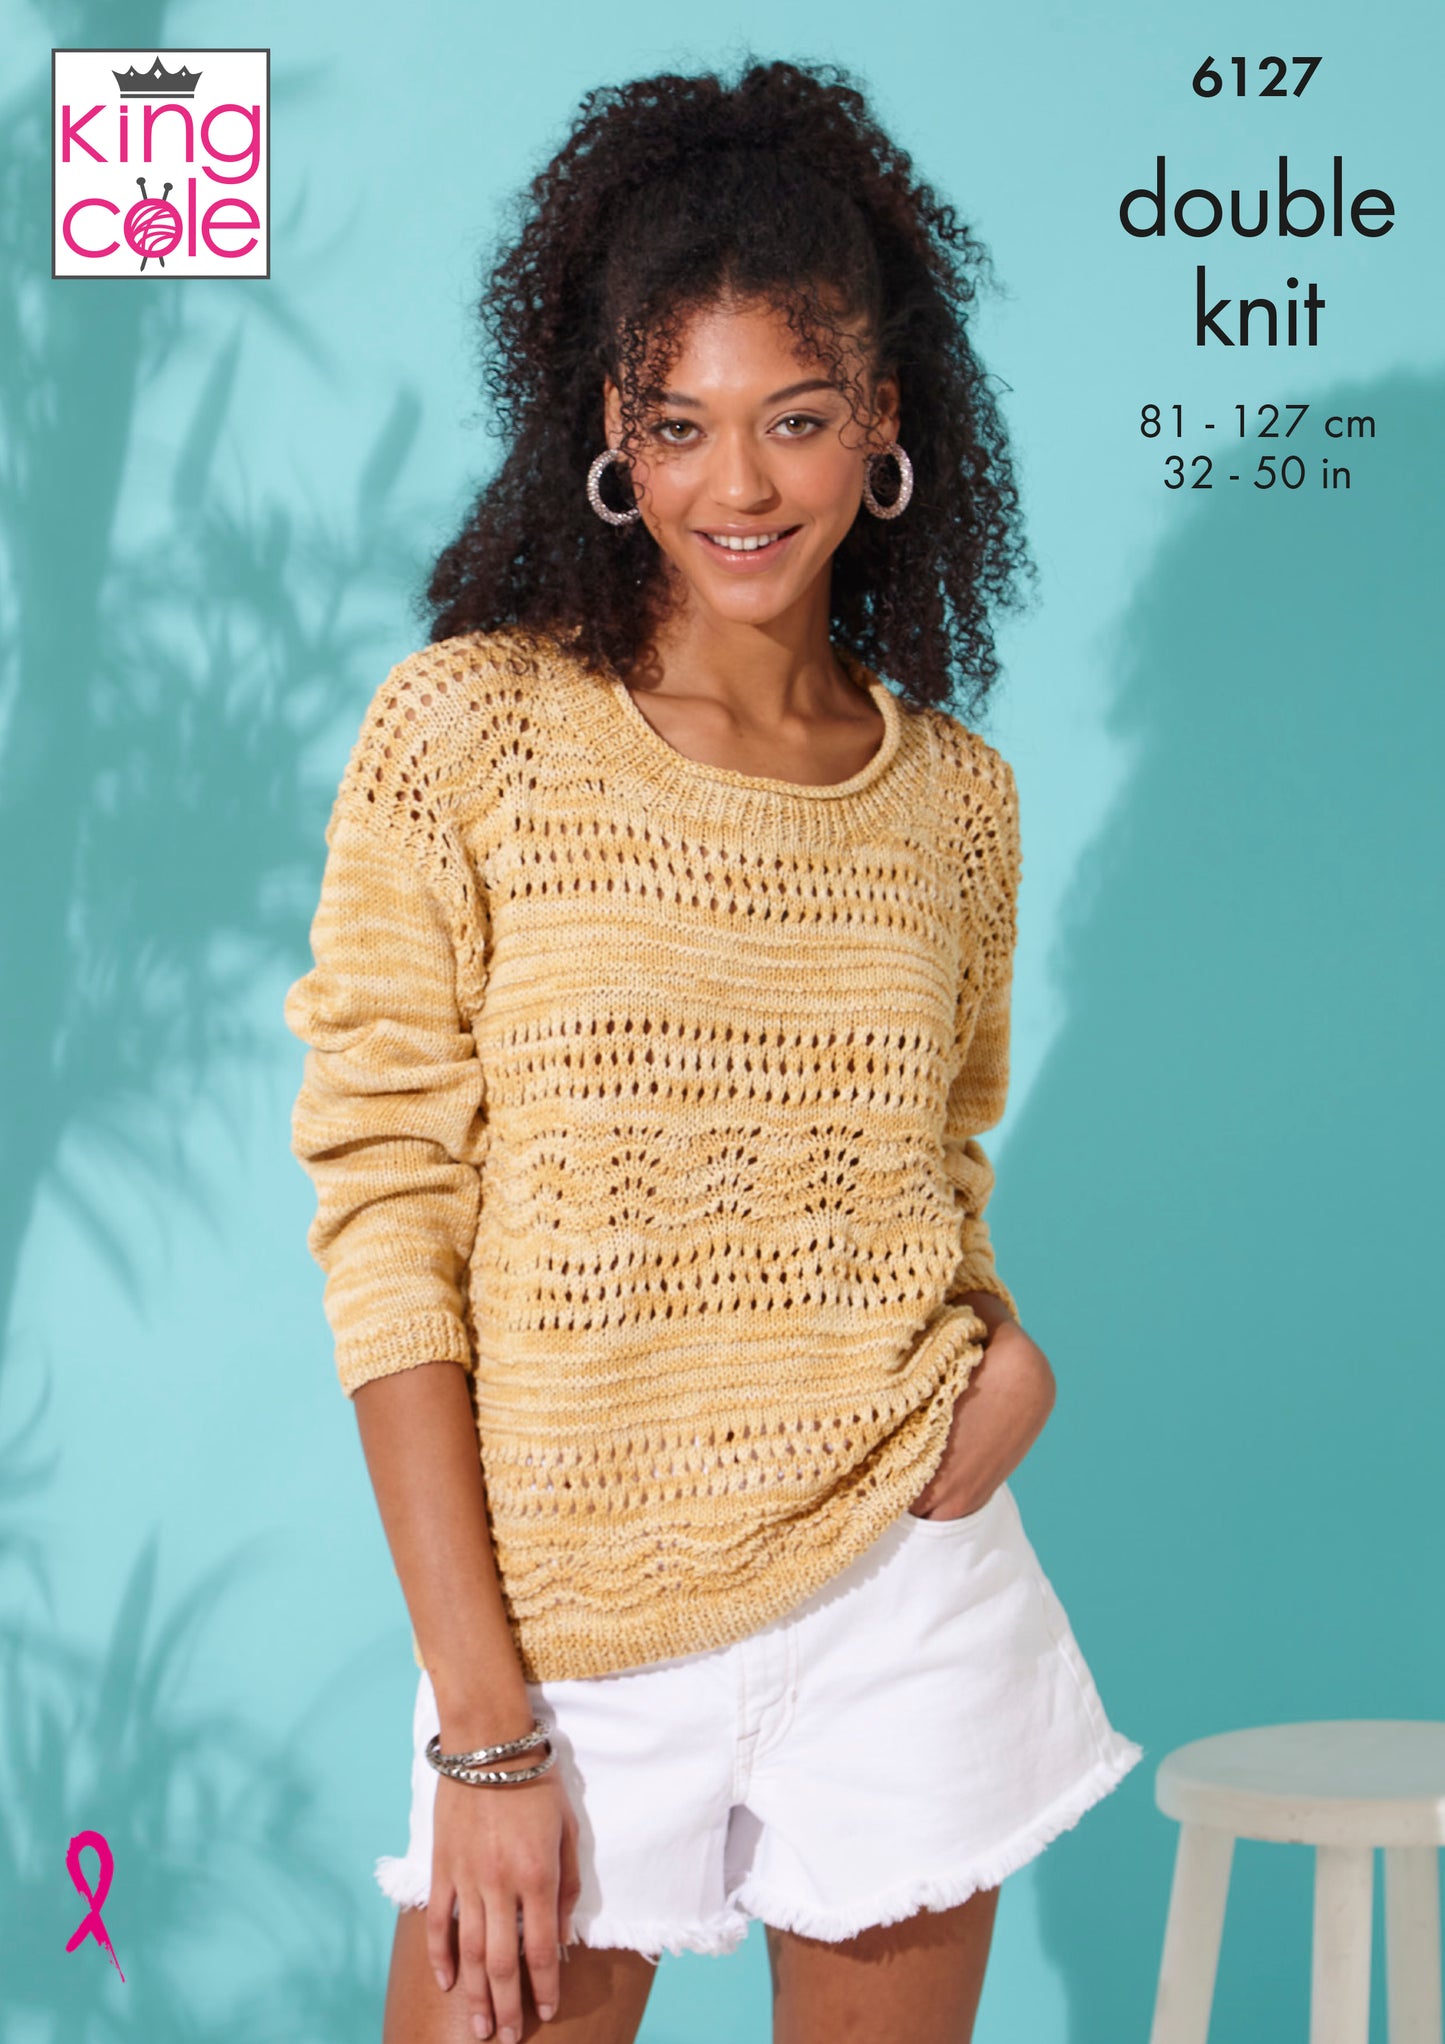 King Cole Sweater & Top Knitted in Linendale Reflections DK - 6127